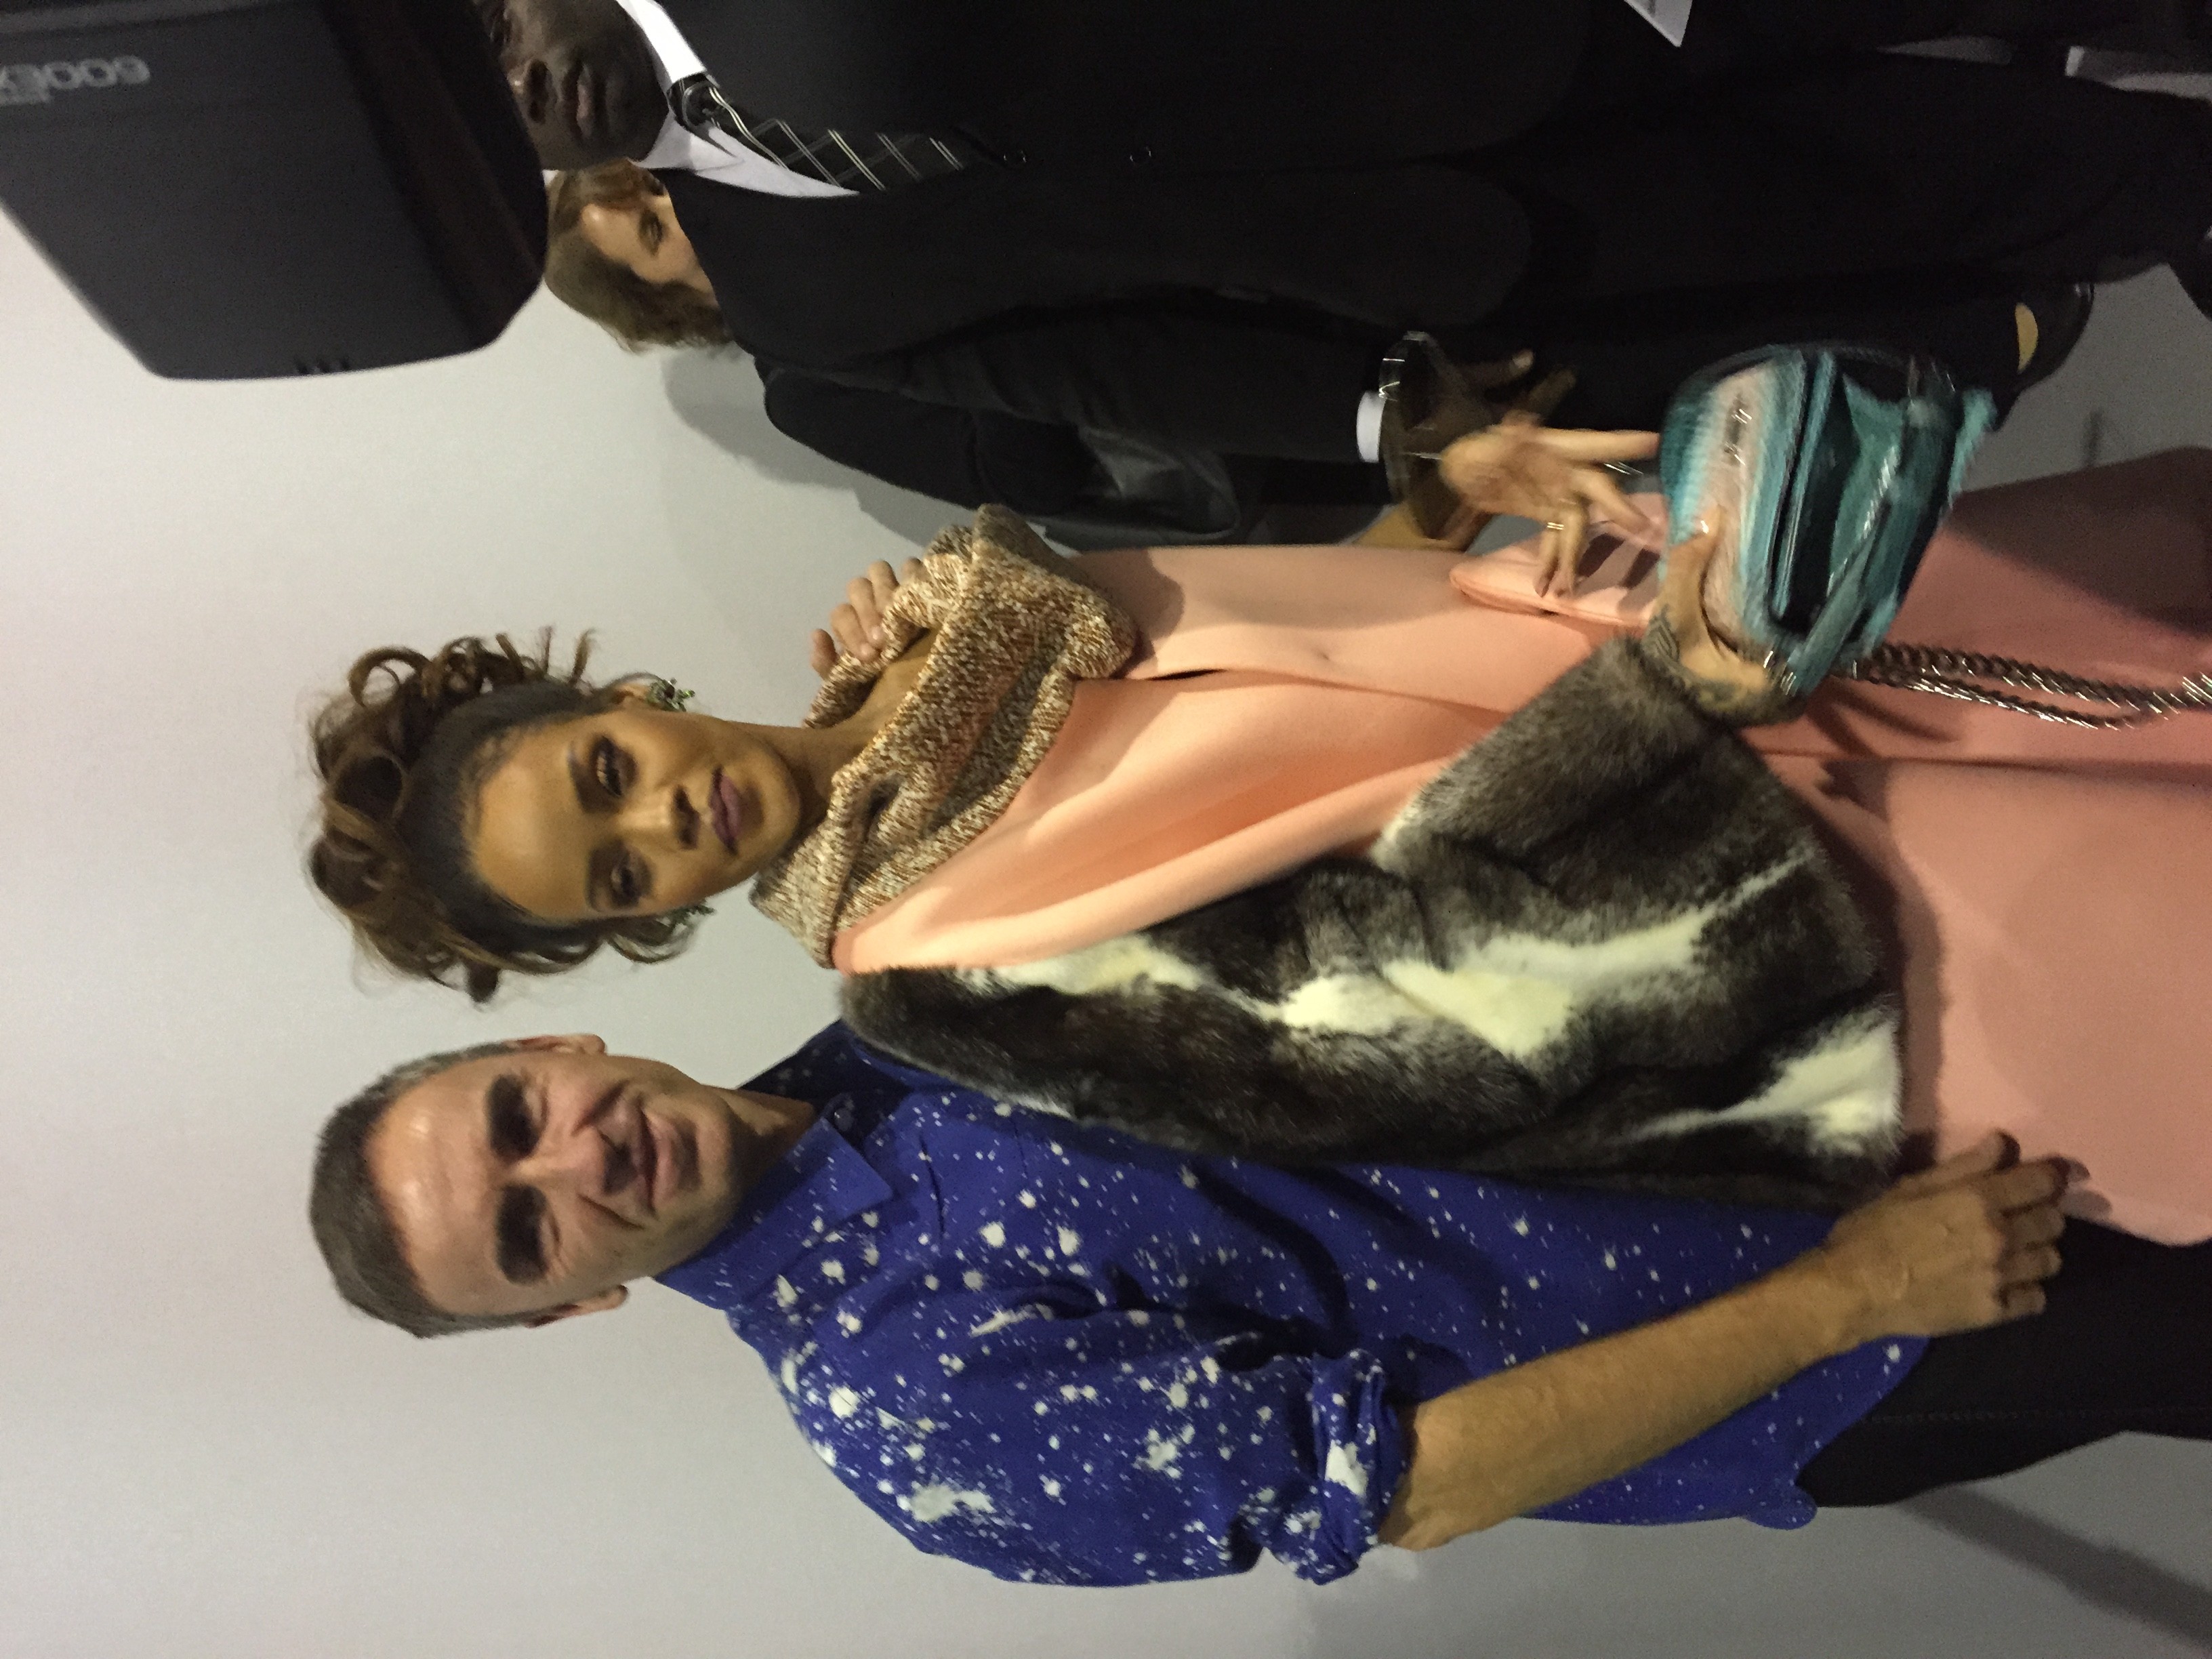 Raf Simons with Rihanna, backstage after his S/S 2016 show for Dior in Paris  (Foto: Suzy Menkes Instagram)